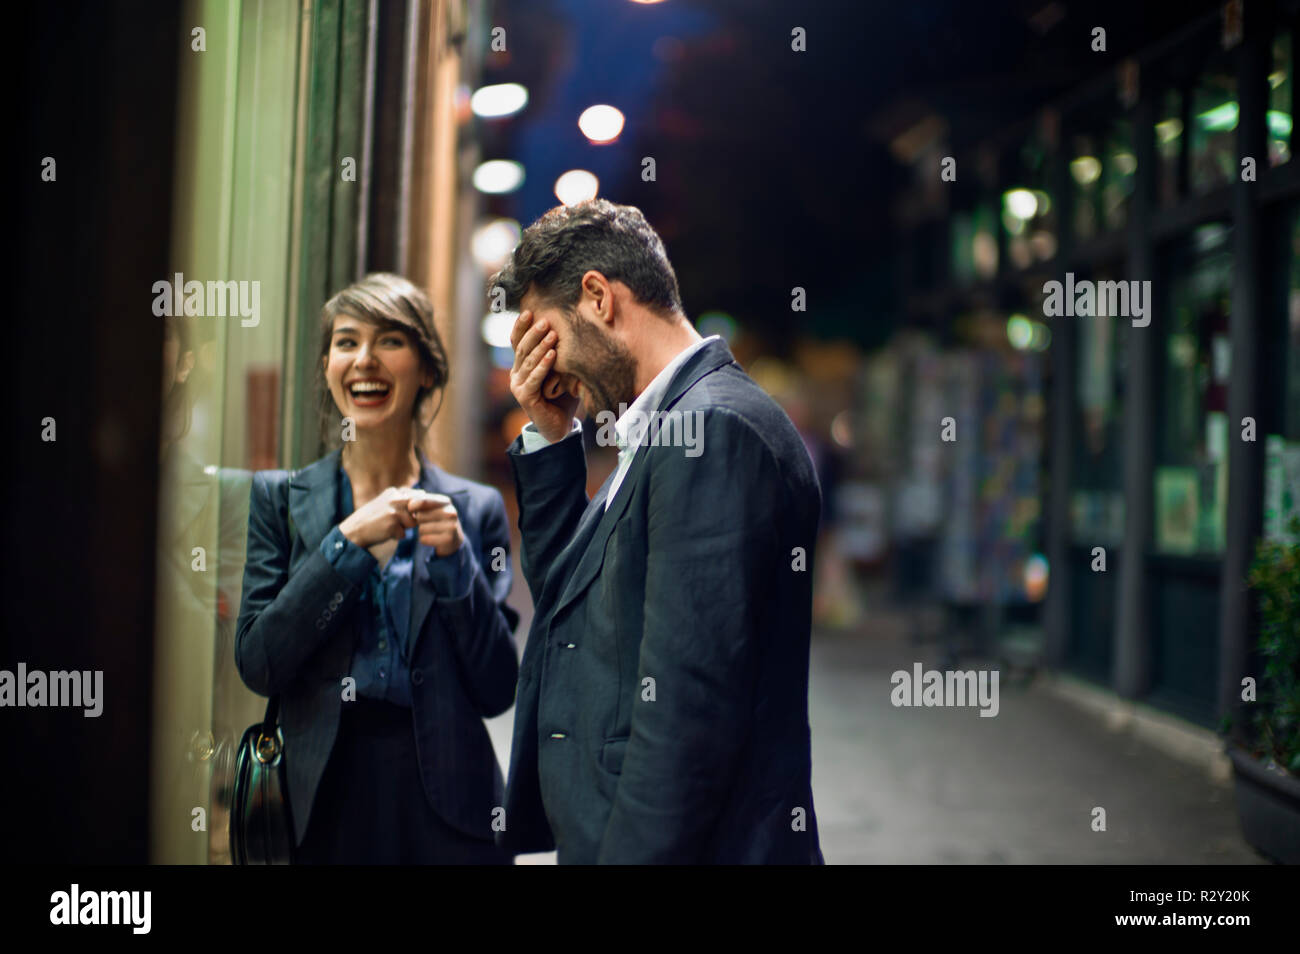 Young man is embarrassed by something he just said while on an after-work date with a female colleague. Stock Photo